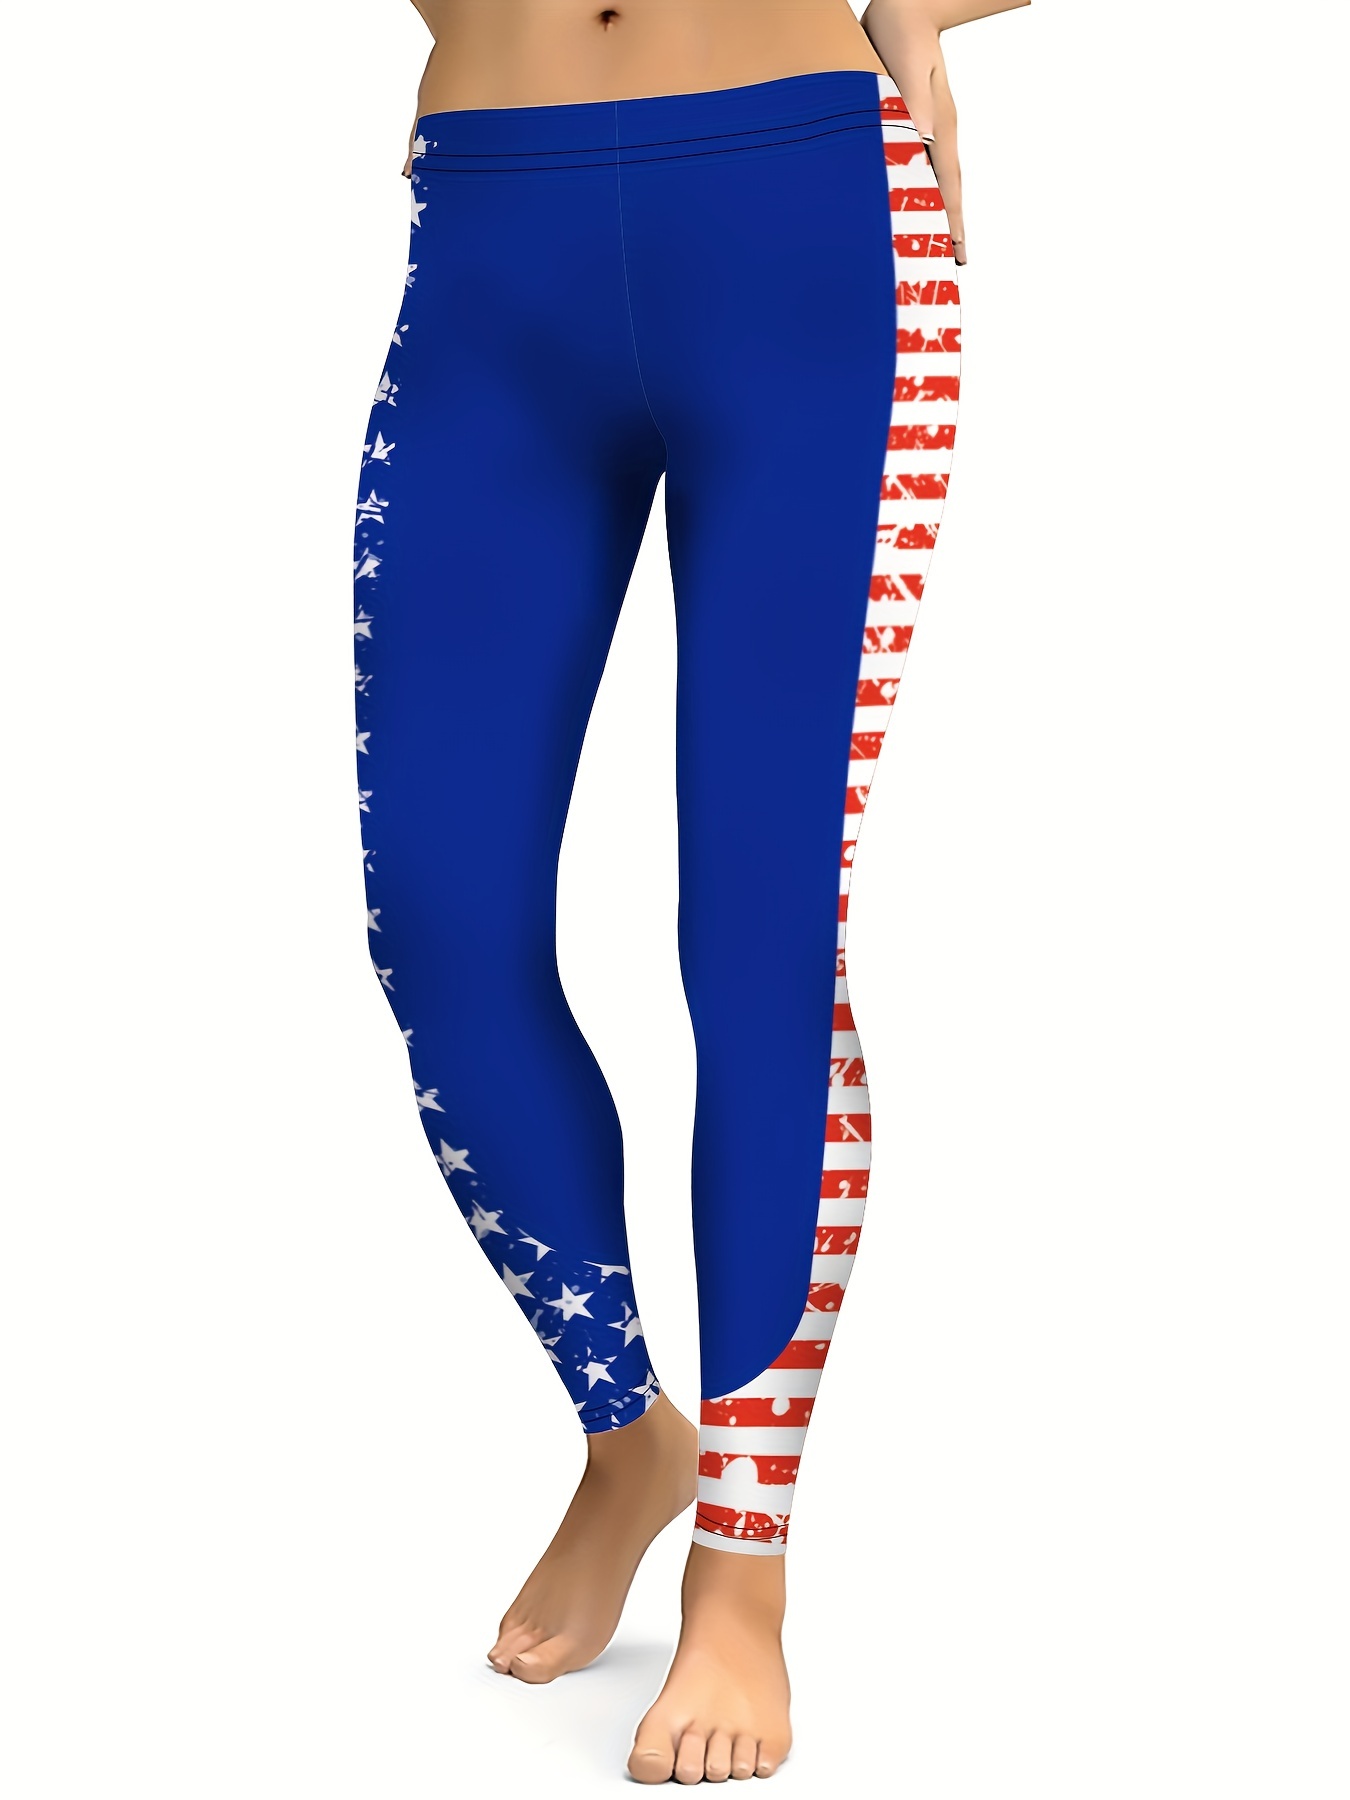  July 4th Women's Yoga Pants High Waisted Workout